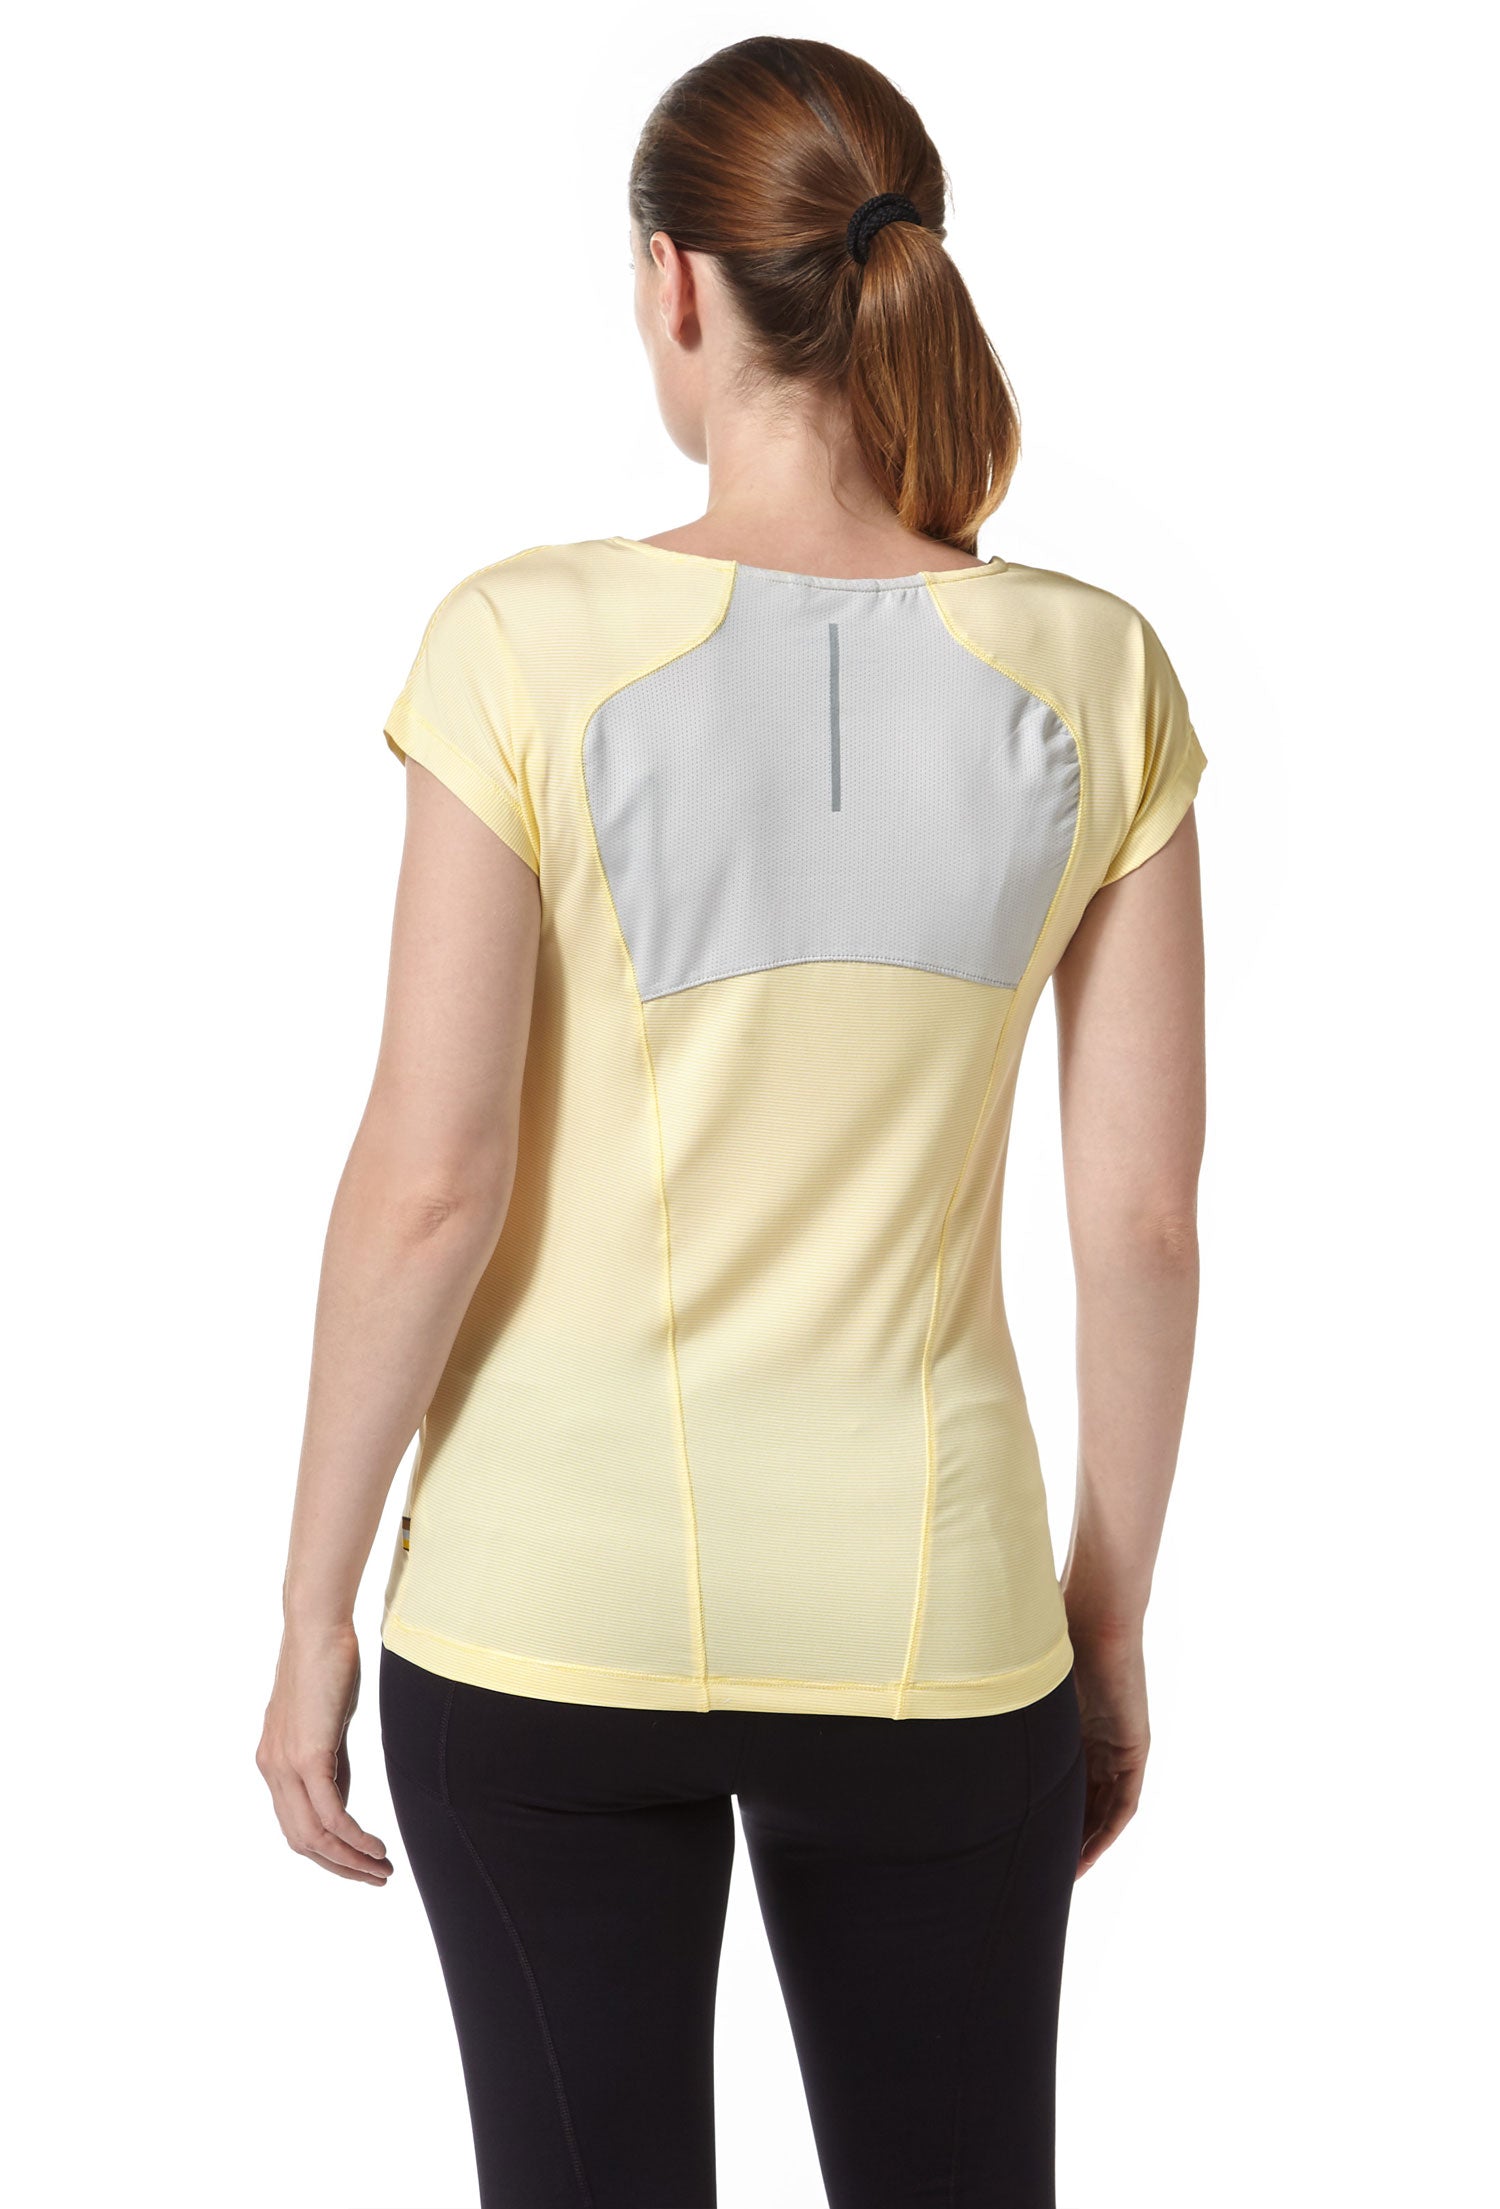 Rear view Craghoppers Fusion T-Shirt Buttercup Yellow